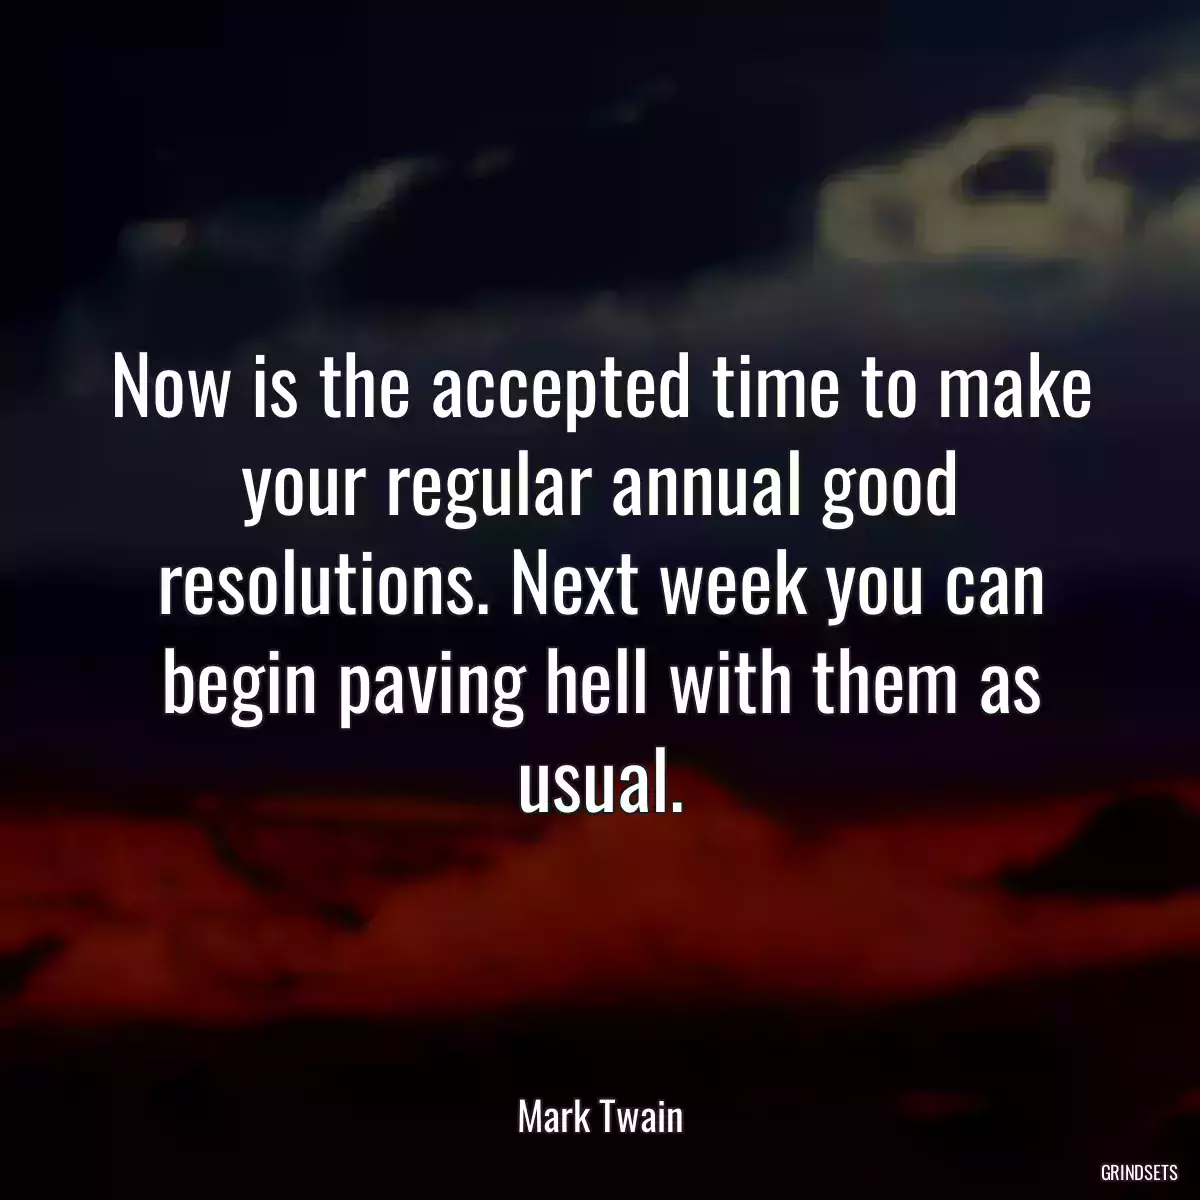 Now is the accepted time to make your regular annual good resolutions. Next week you can begin paving hell with them as usual.